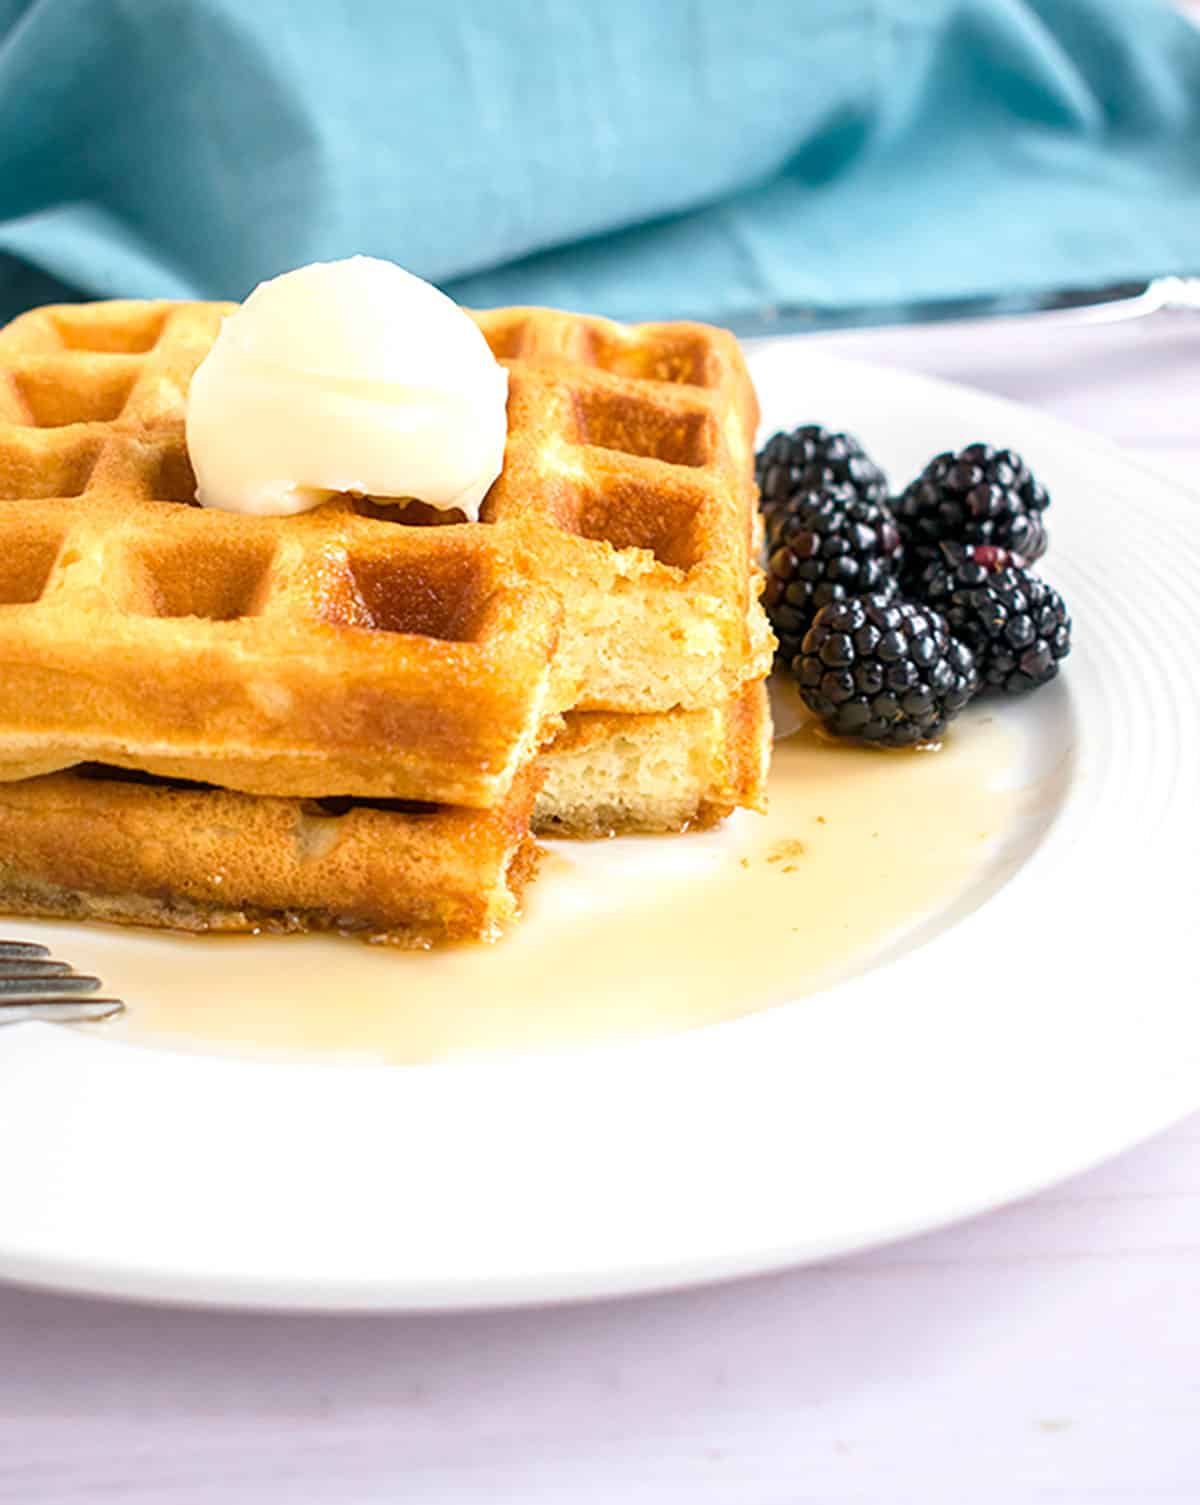 Photo of plate of Homemade Waffles with butter, syrup and blackberries